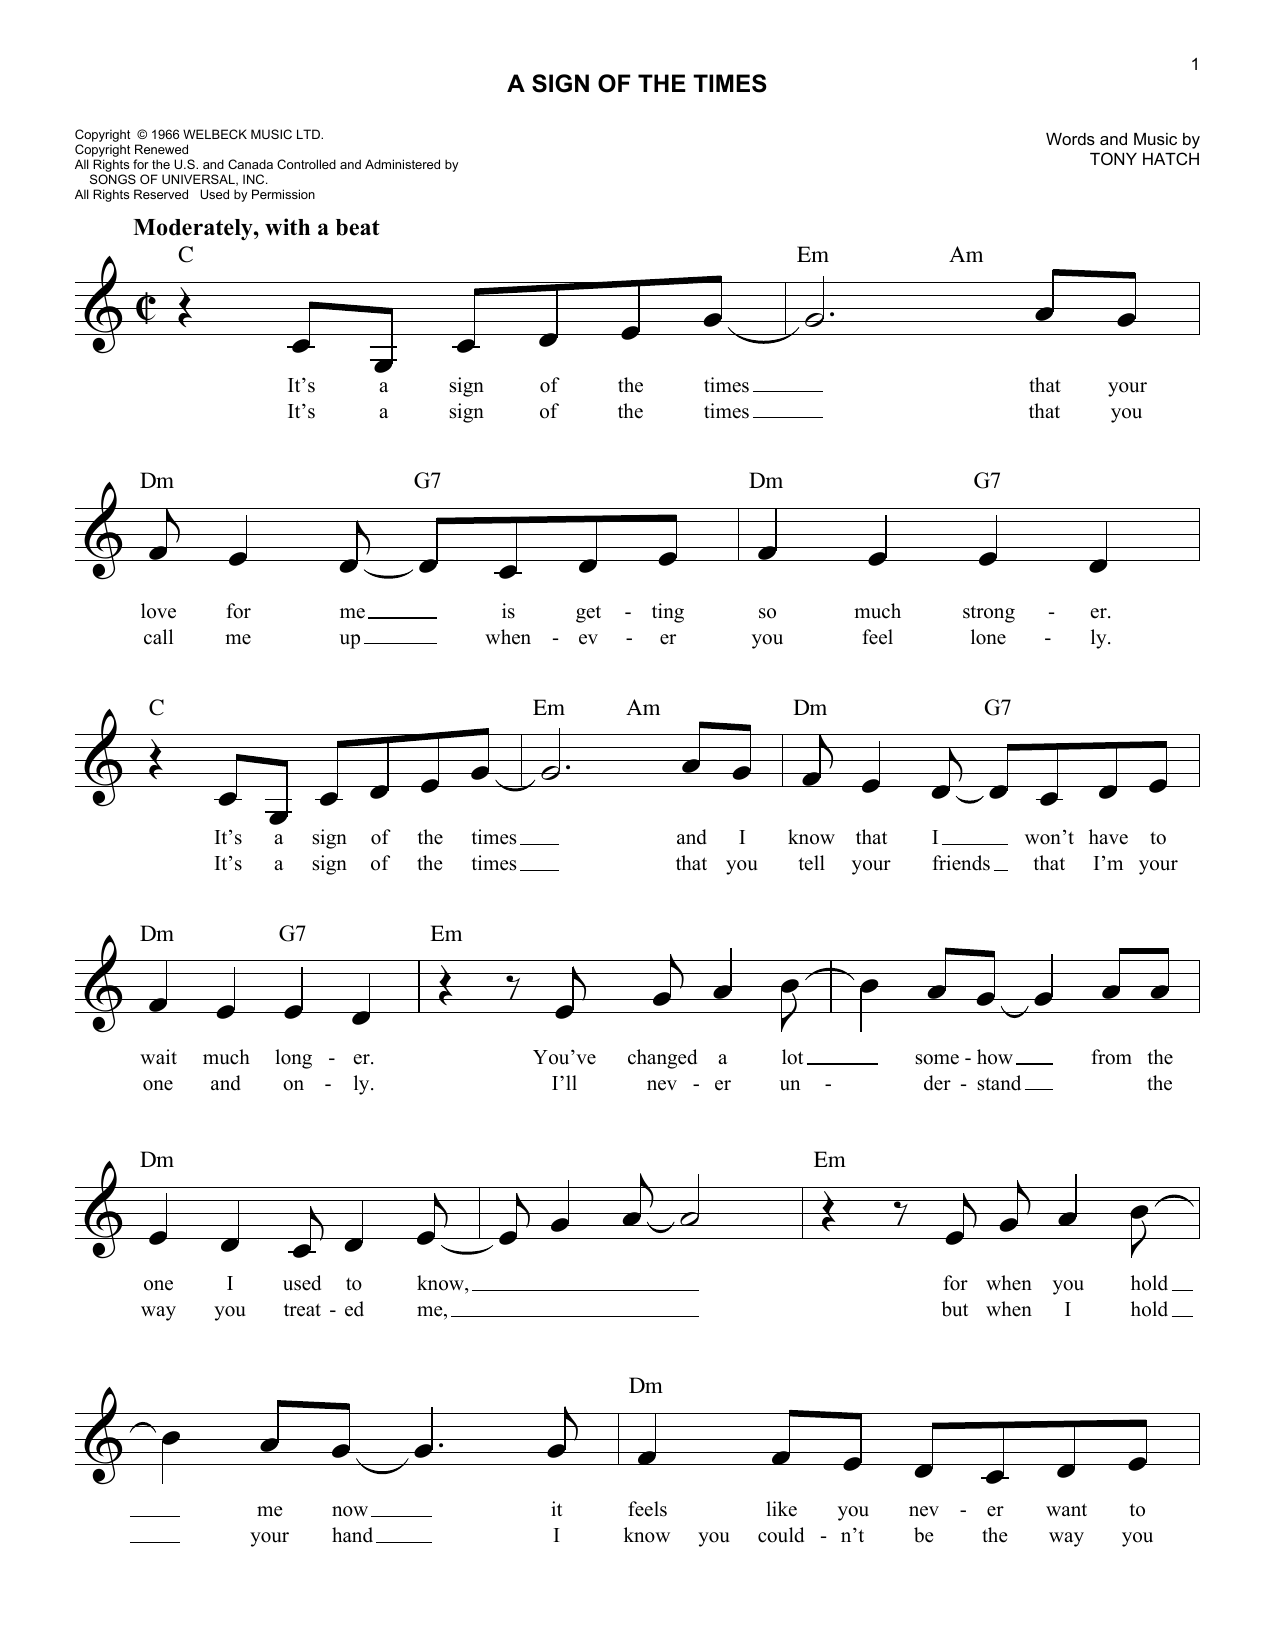 Download Petula Clark A Sign Of The Times Sheet Music